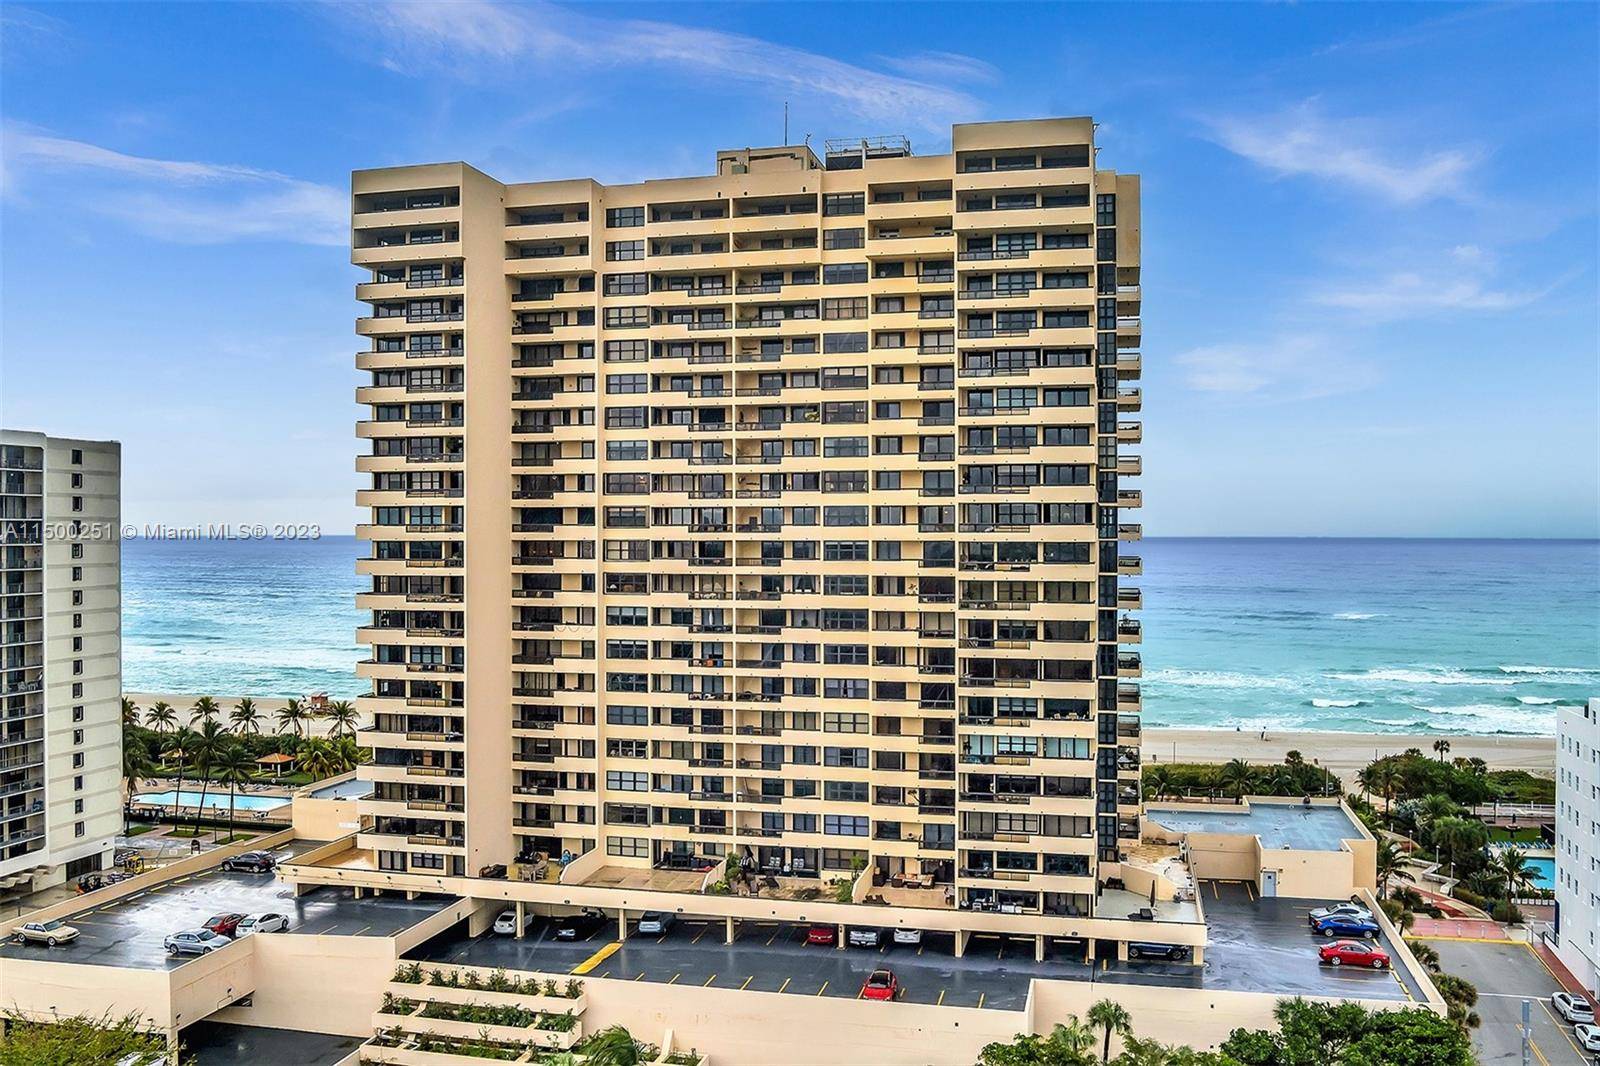 Club Atlantis. Investor's special needs work, But what doesnt need to be changed in this corner unit is the direct ocean view from a penthouse level 25th floor with a ...